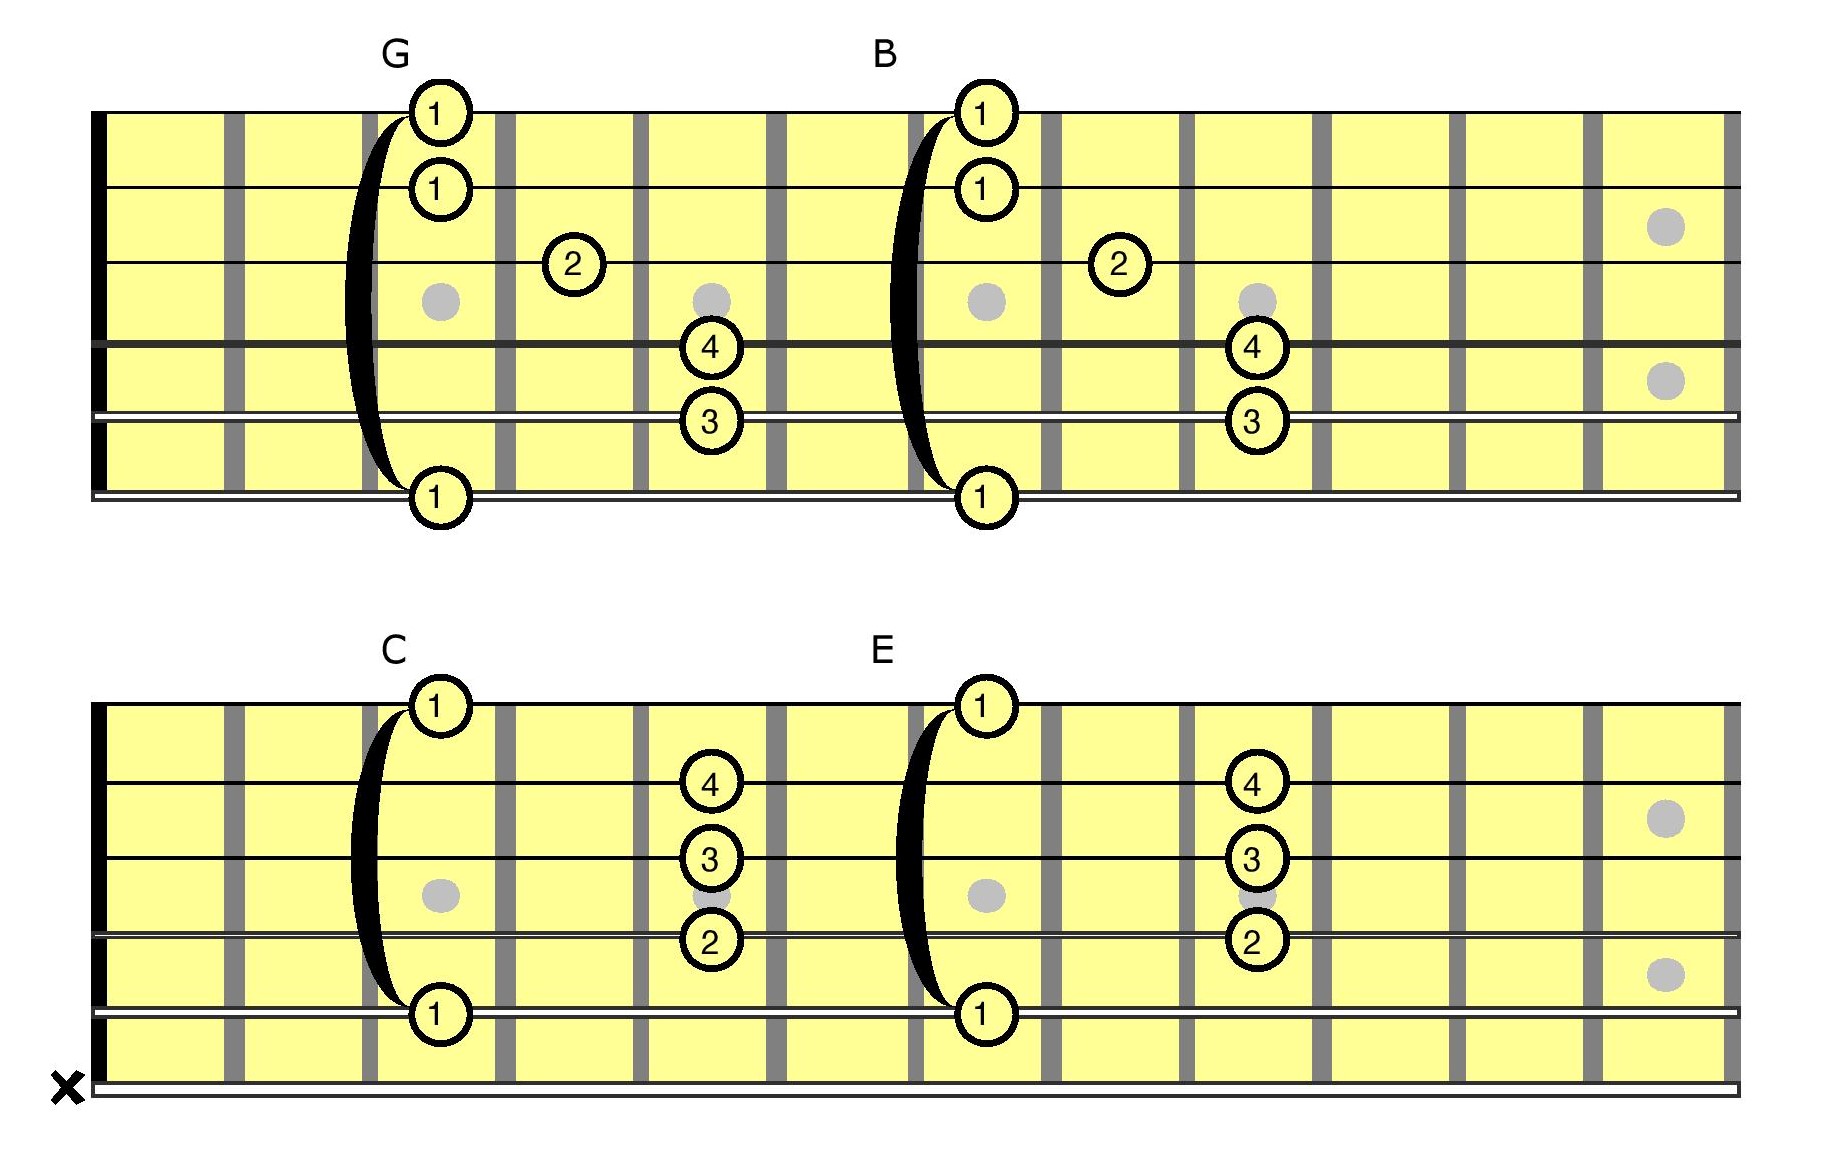 Fingering charts for guitarists.